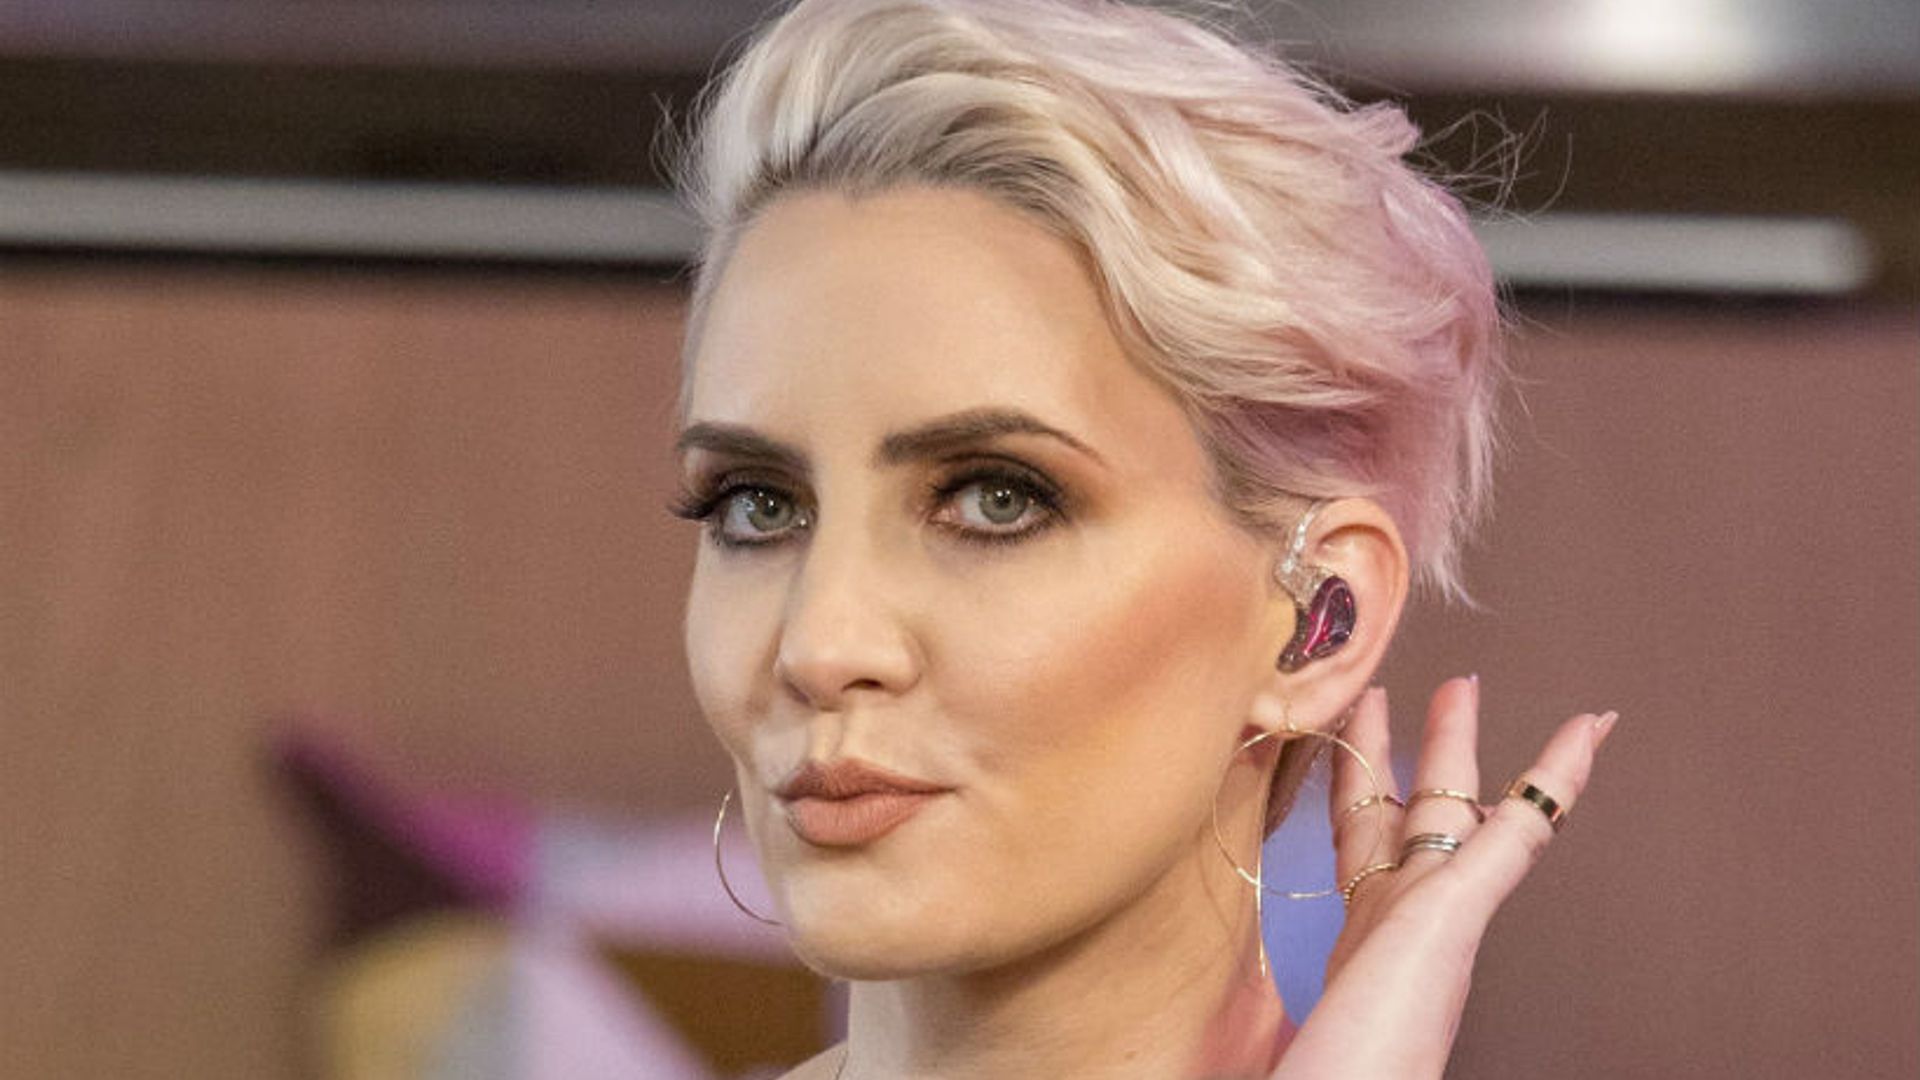 claire richards weight loss